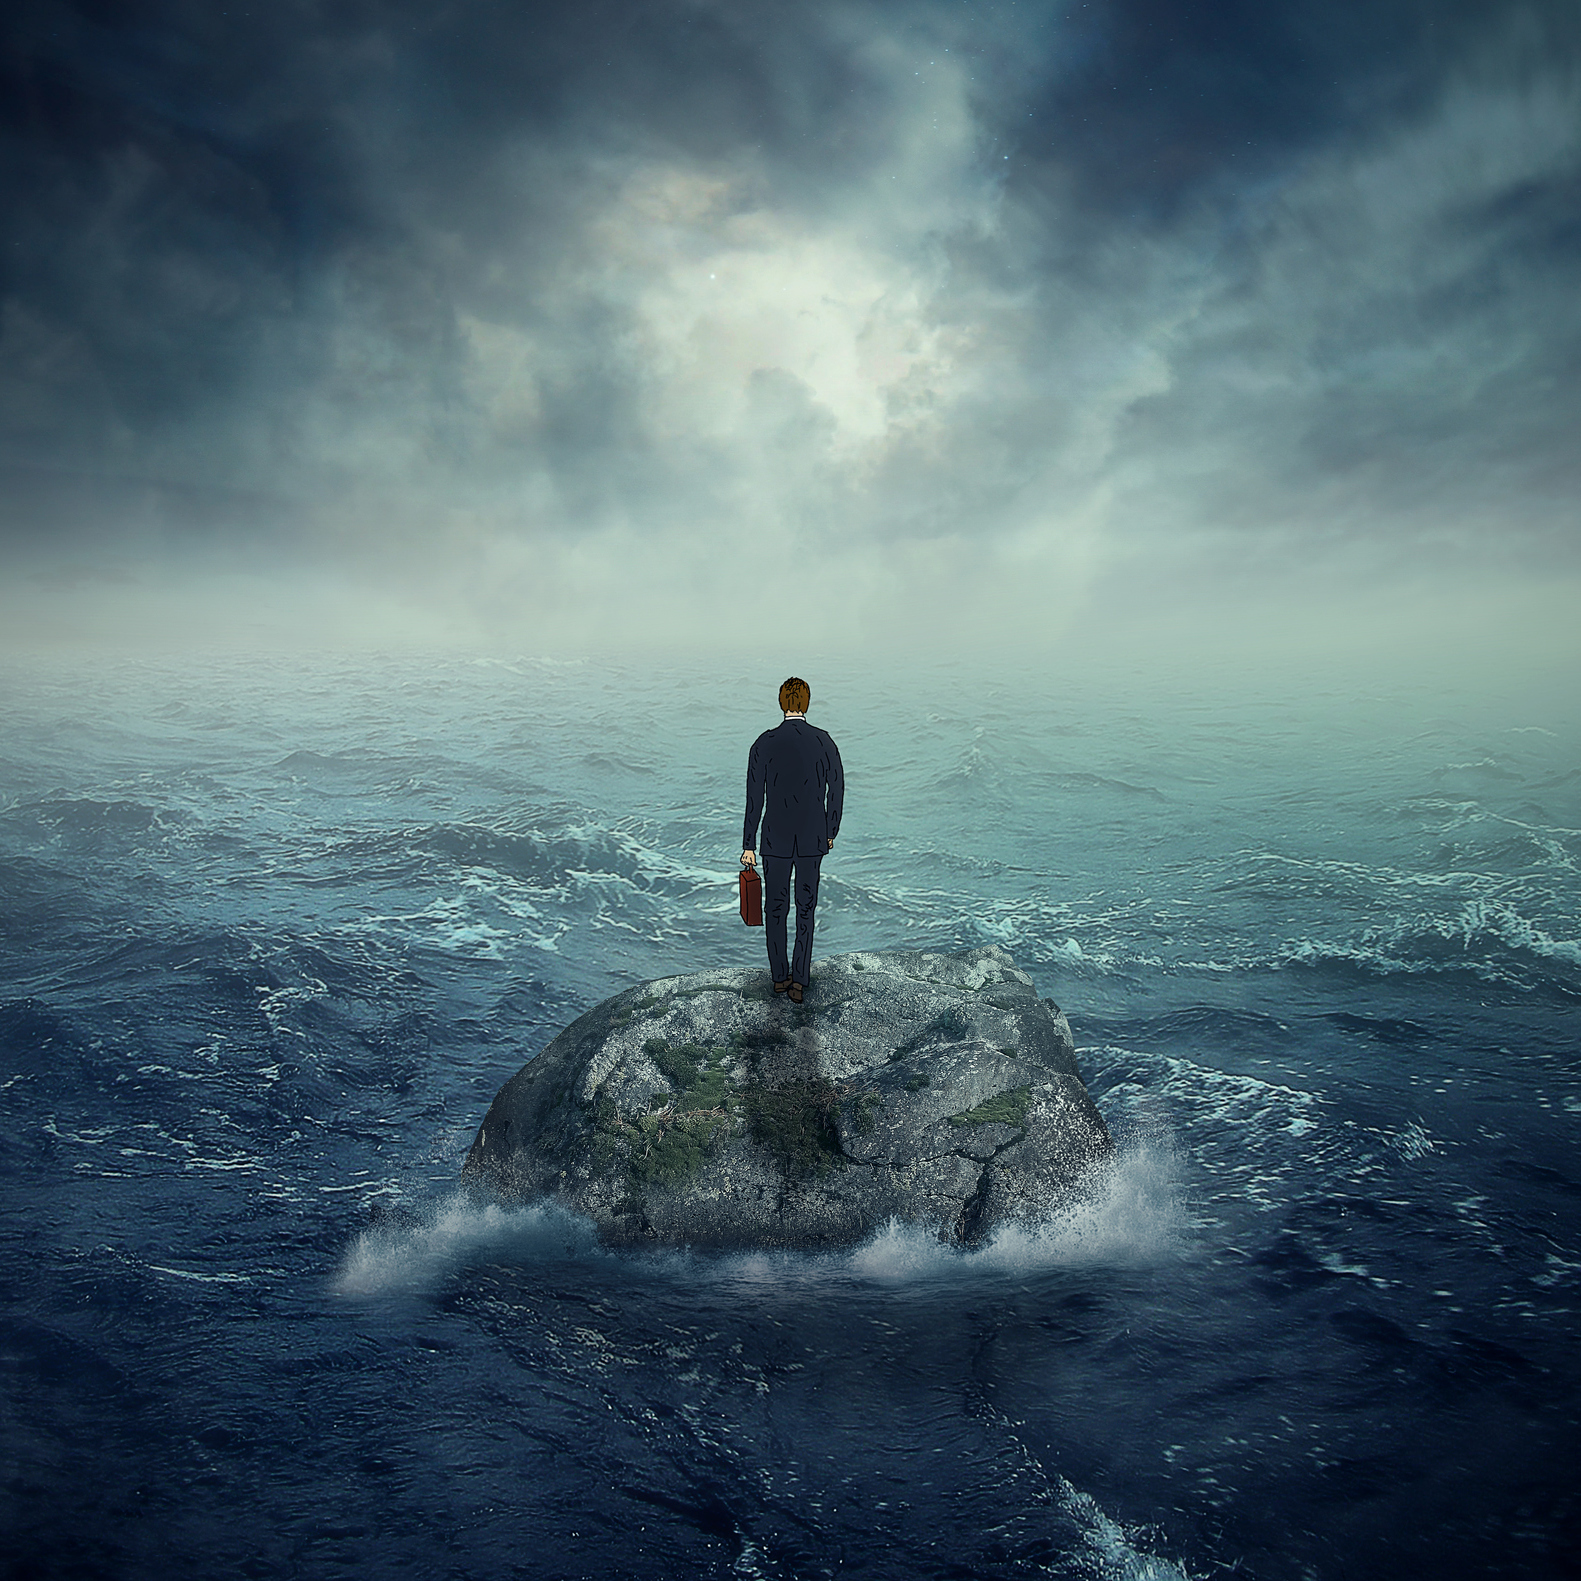 man standing on a rock in the middle of a stormy sea